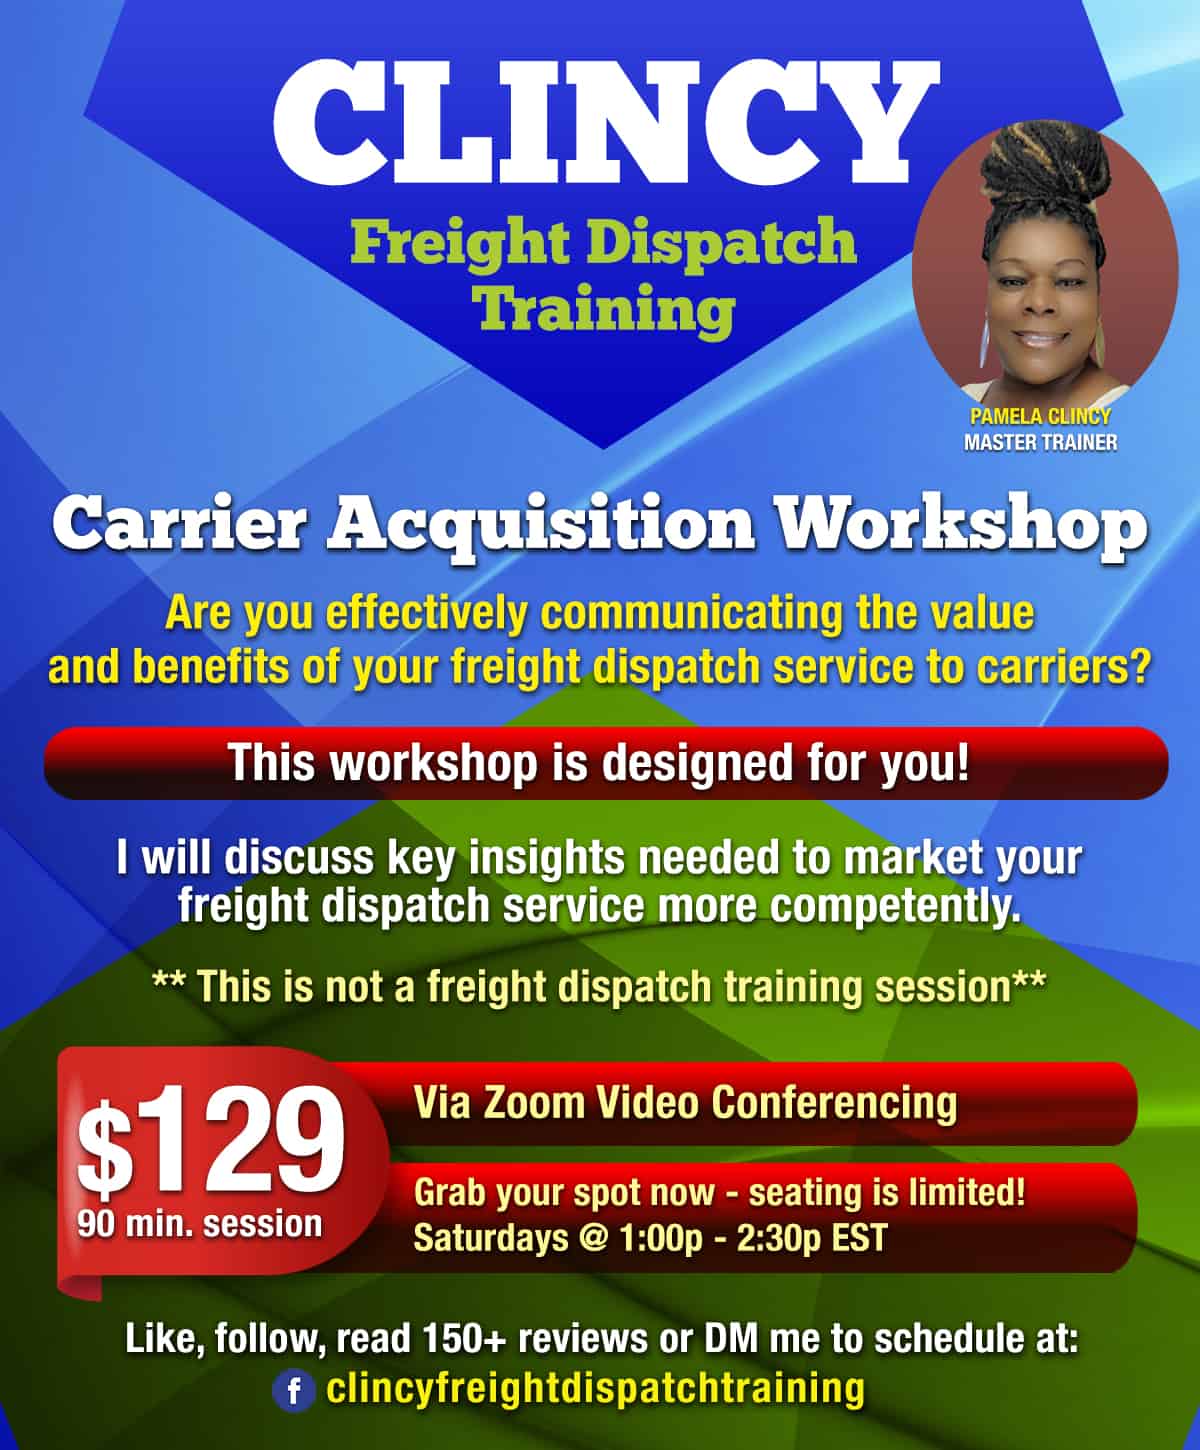 carrieracquisitionworkshop2023B 2 1 - Clincy Freight Dispatch Training